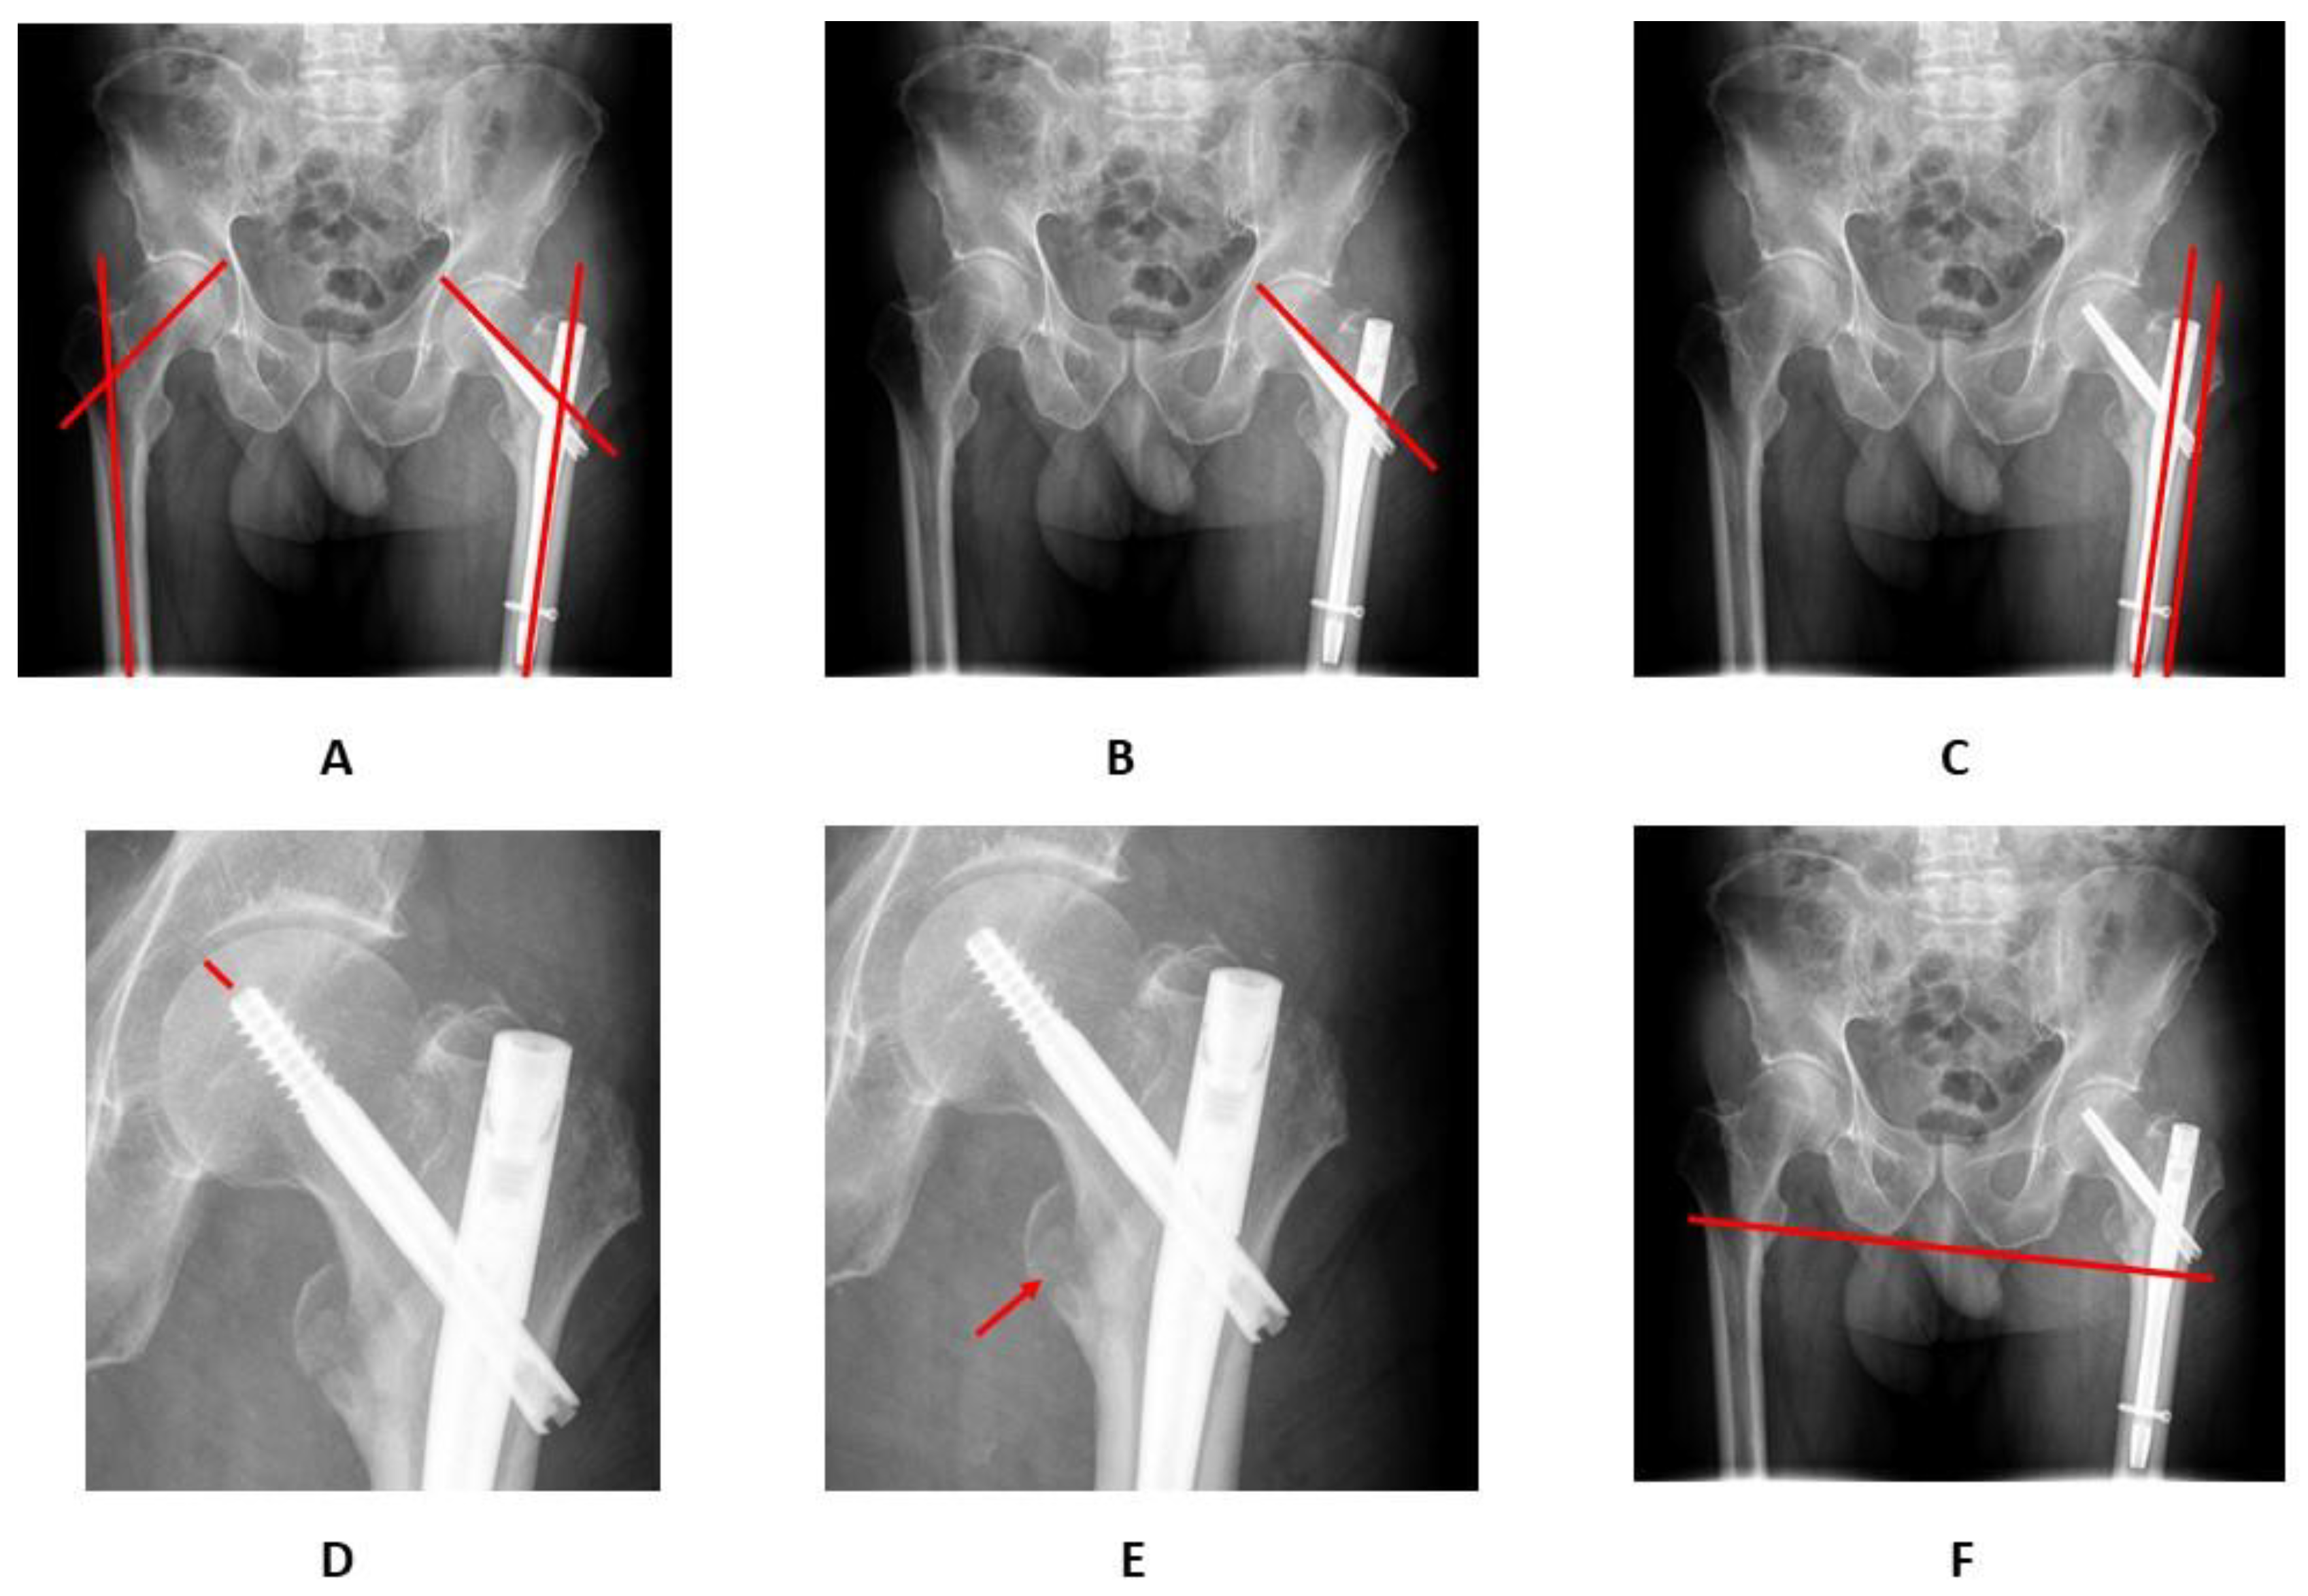 Nonoperative treatment for Simple pertrochanteric fractures with